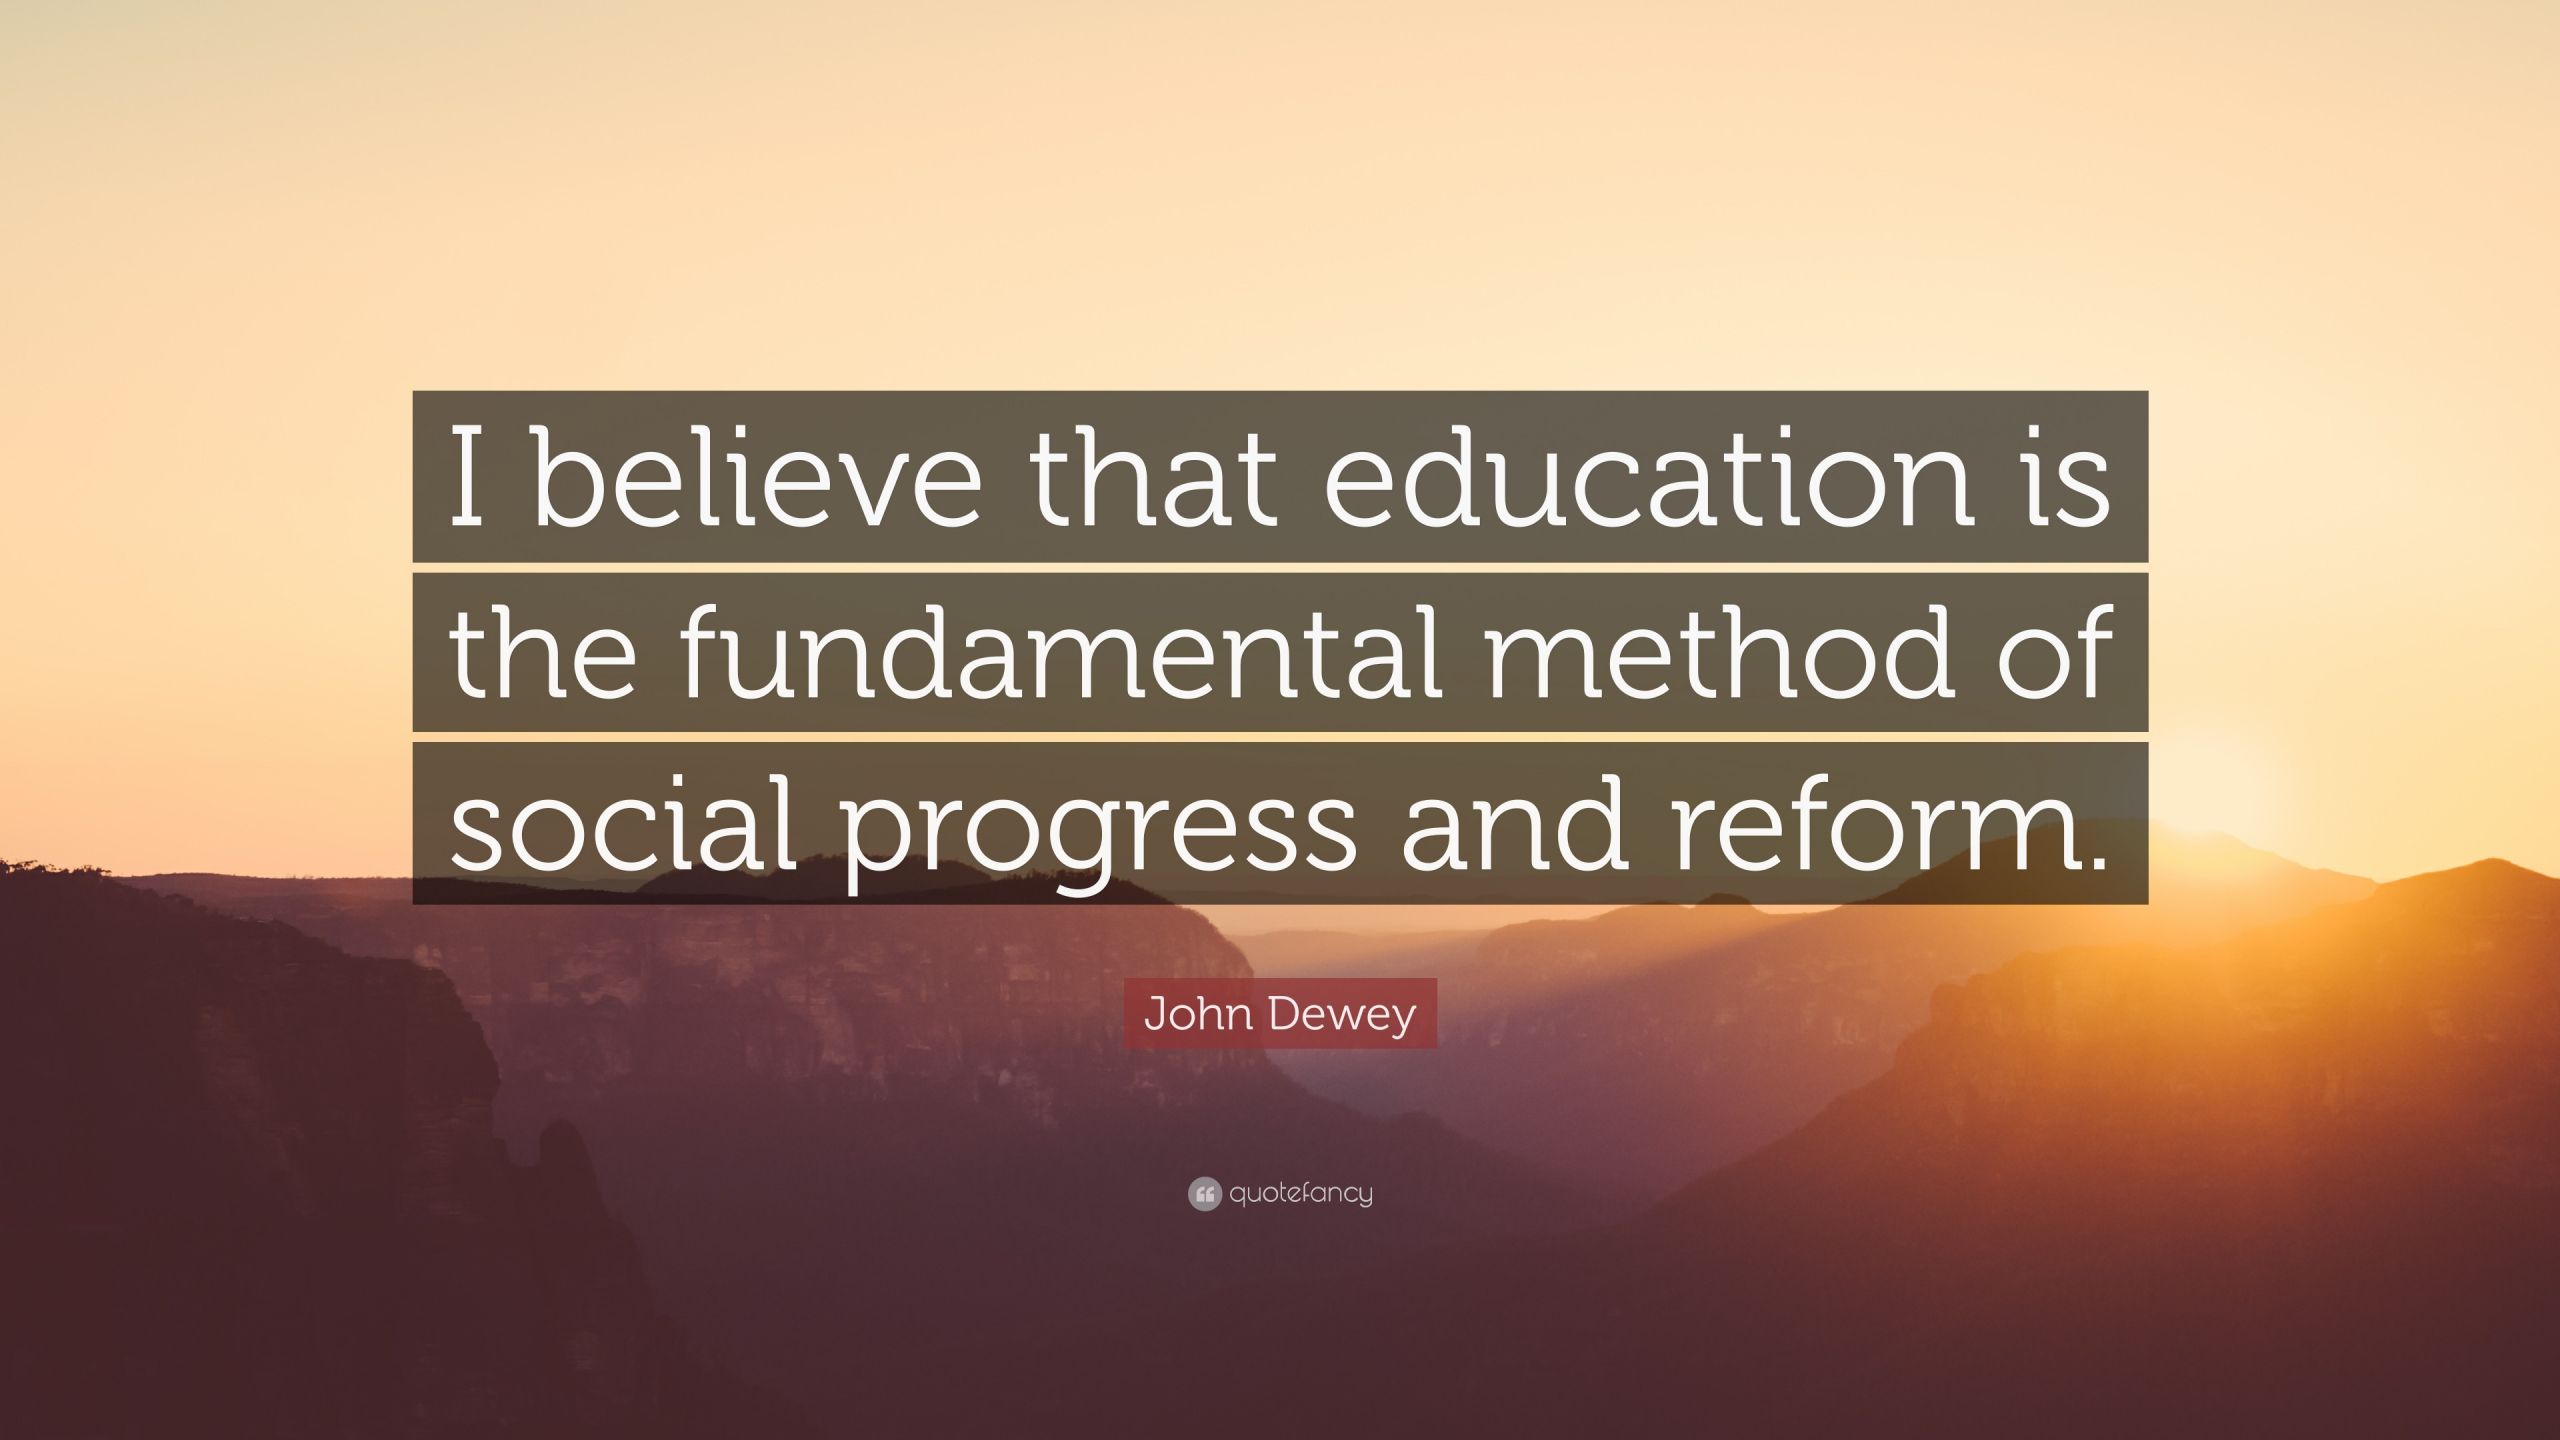 John Dewey Quotes On Education
 John Dewey Quote “I believe that education is the